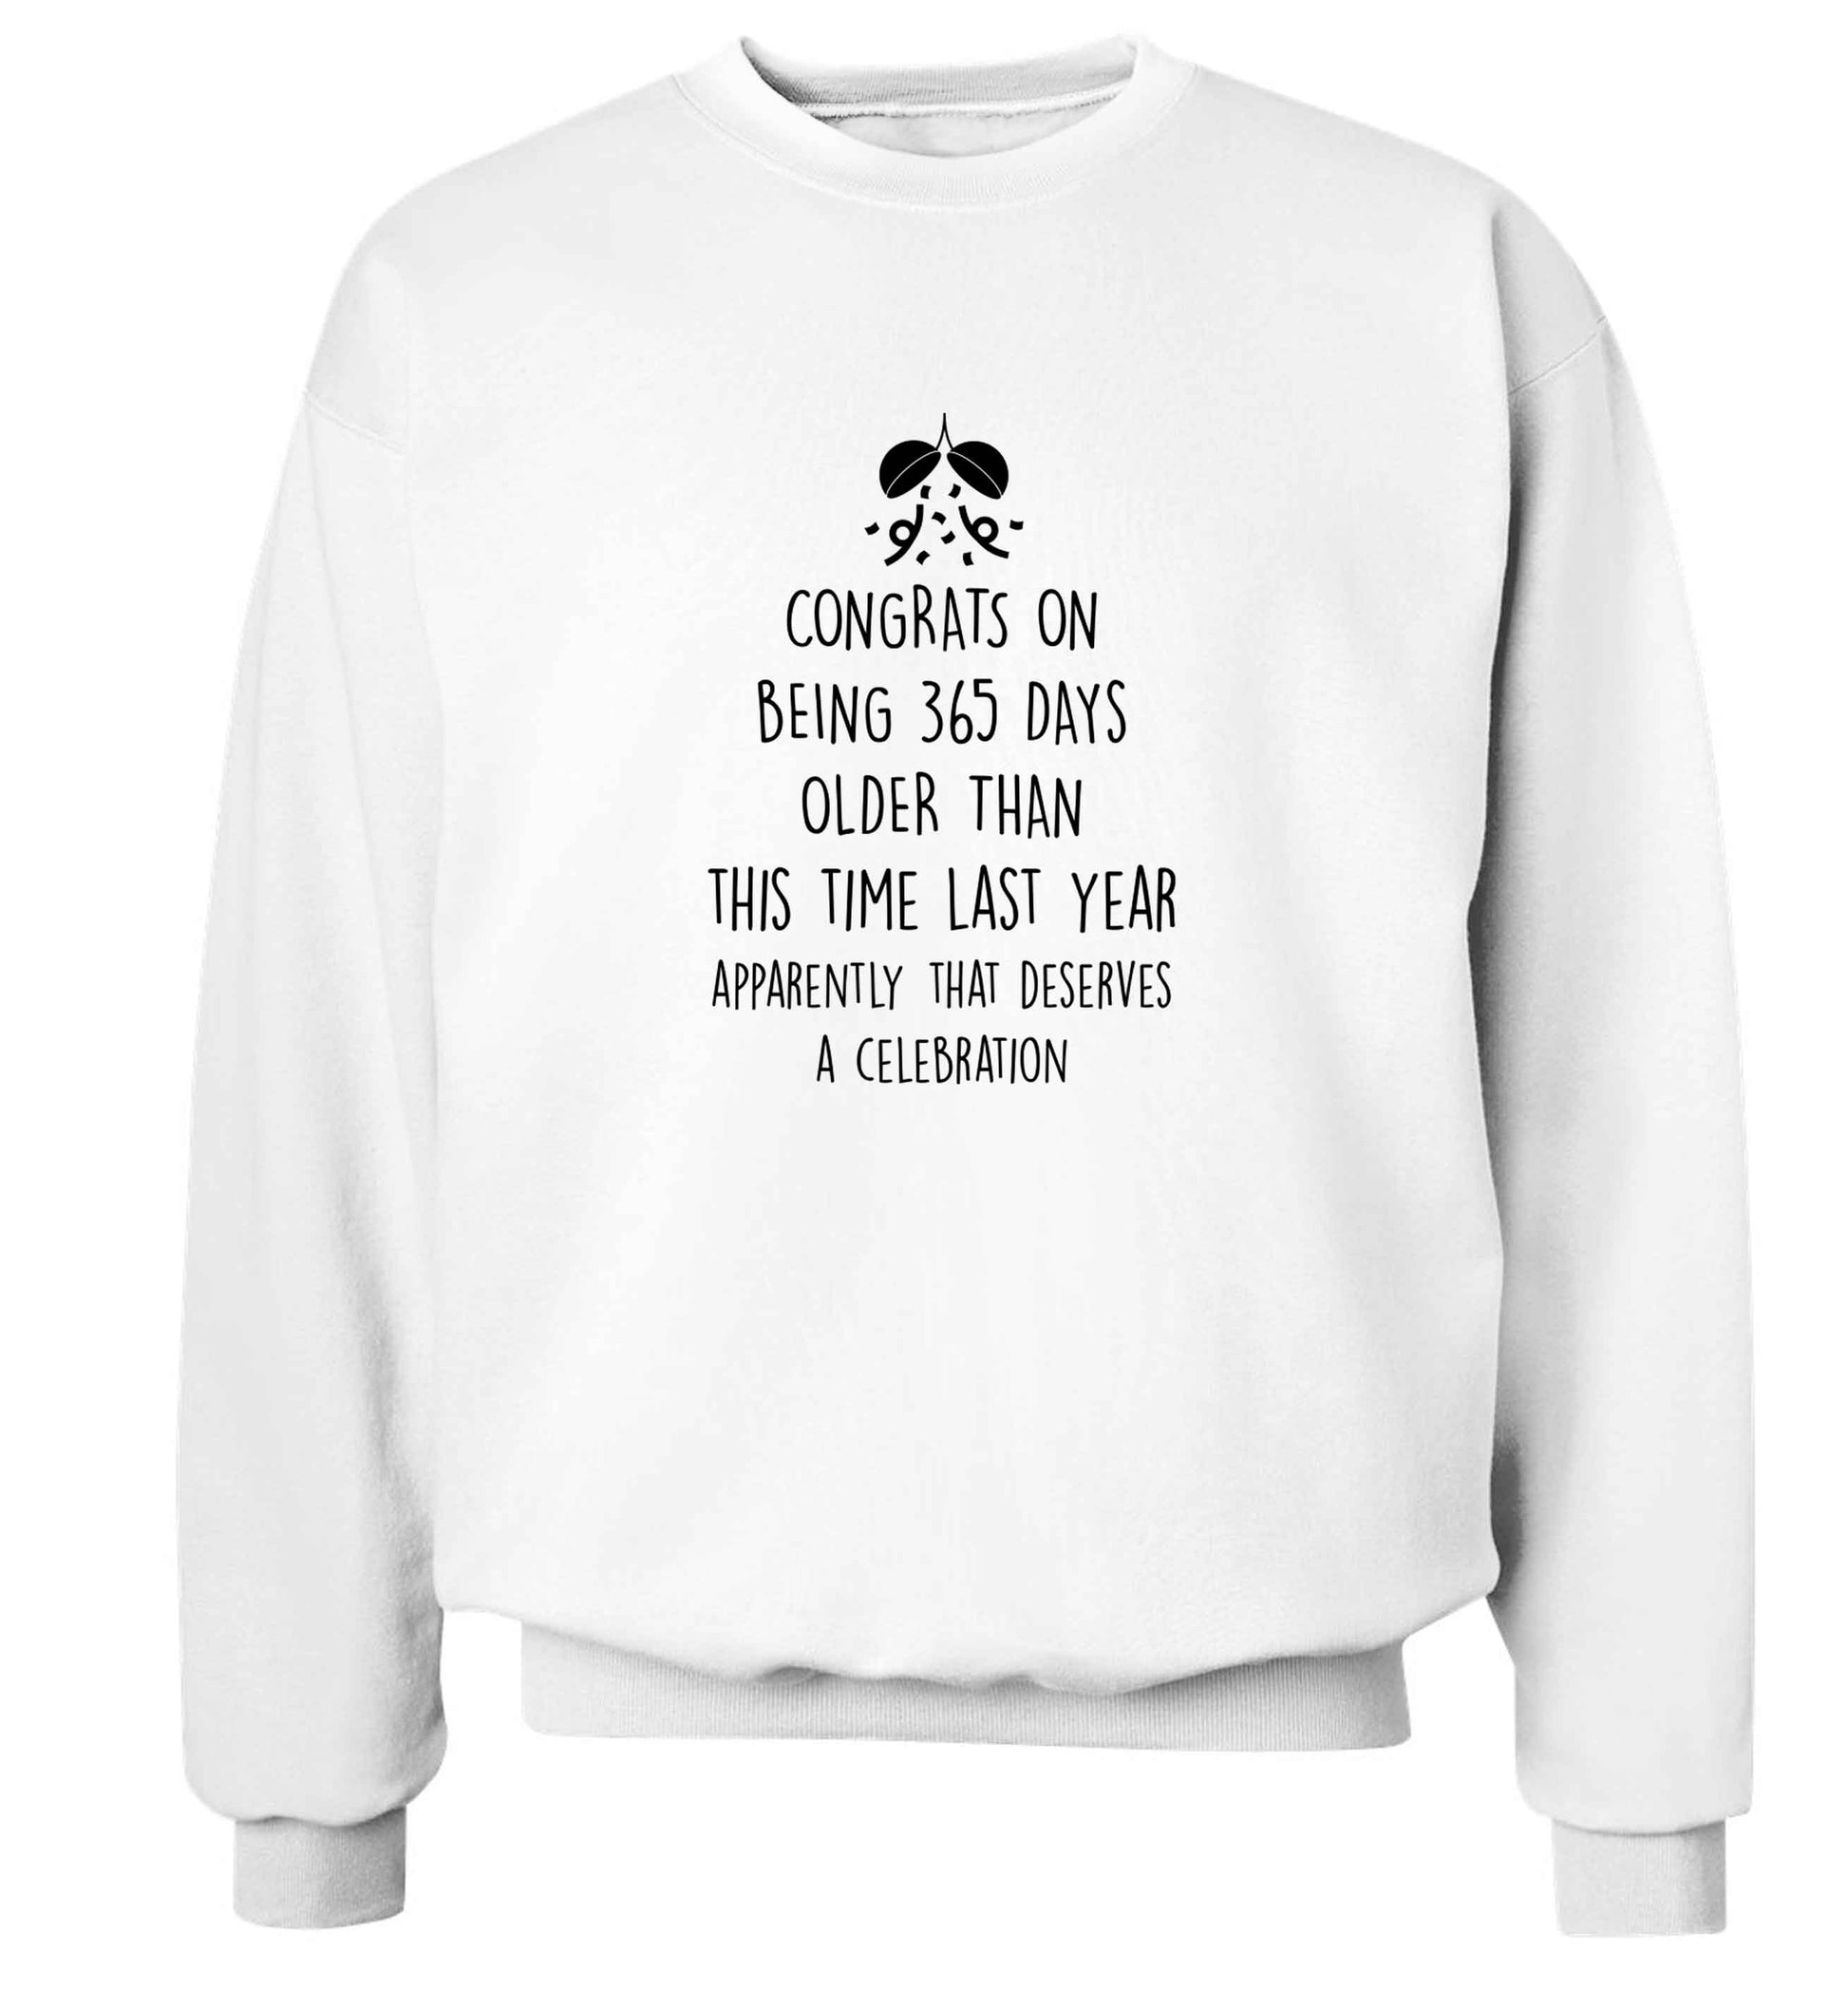 Congrats on being 365 days older than you were this time last year apparently that deserves a celebration adult's unisex white sweater 2XL